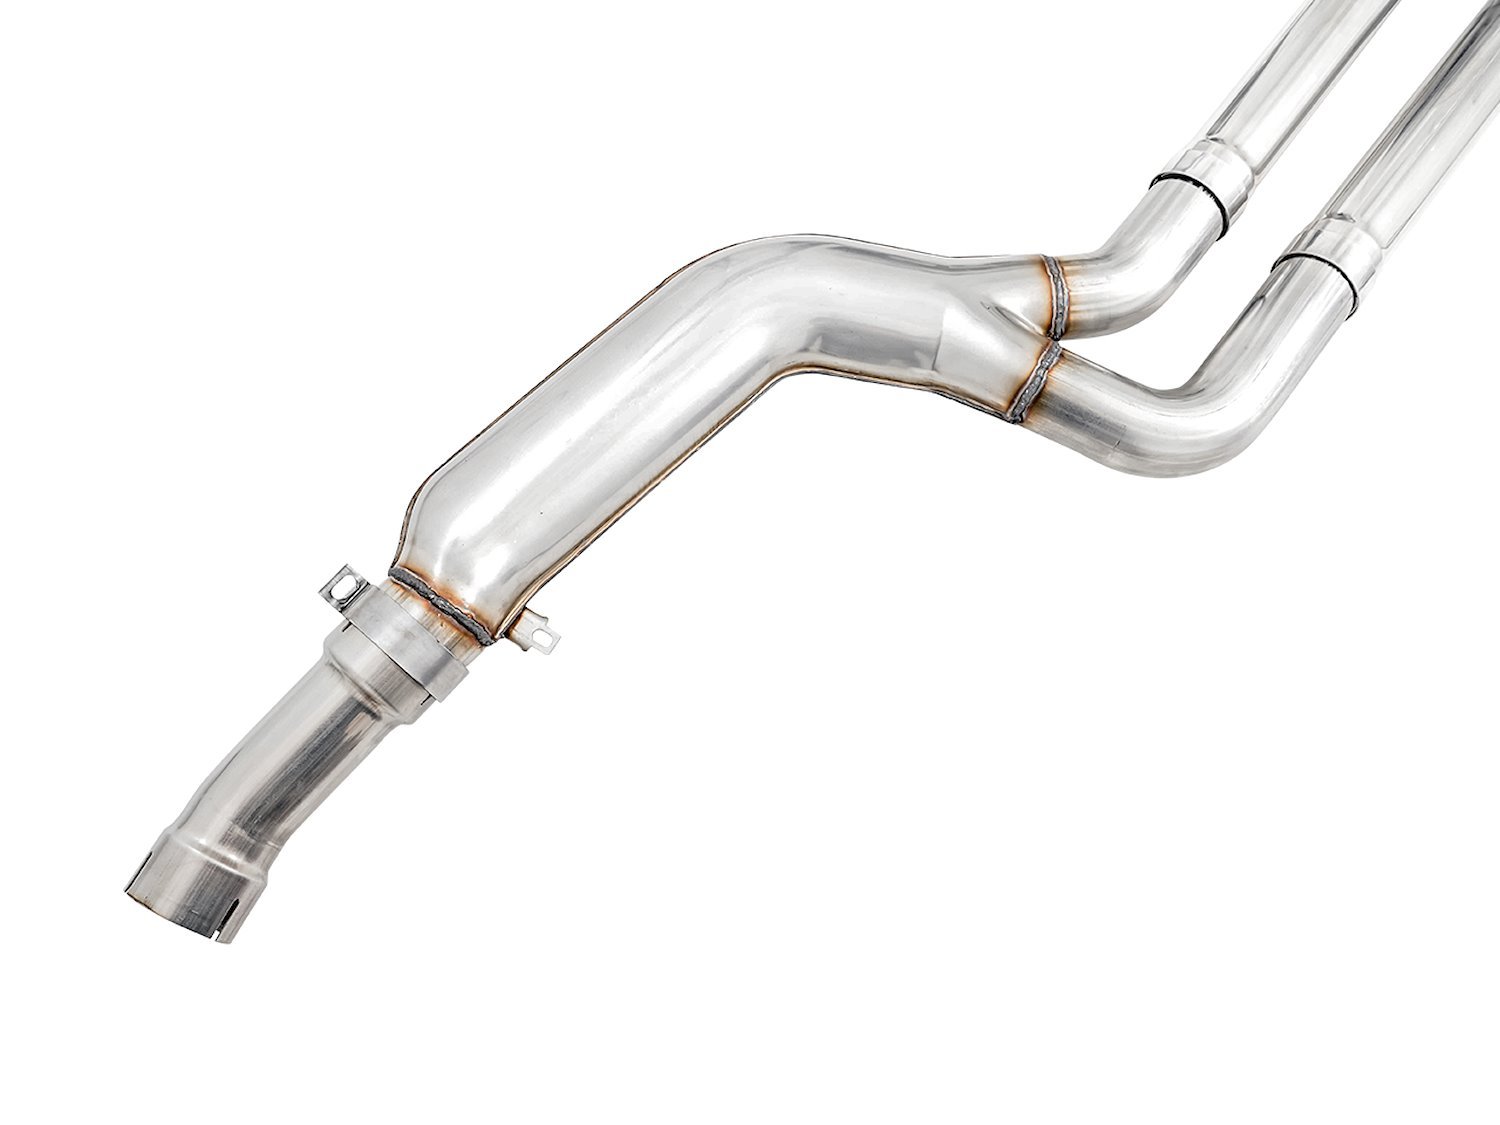 Resonated Touring Edition Exhaust for G2X M340i /